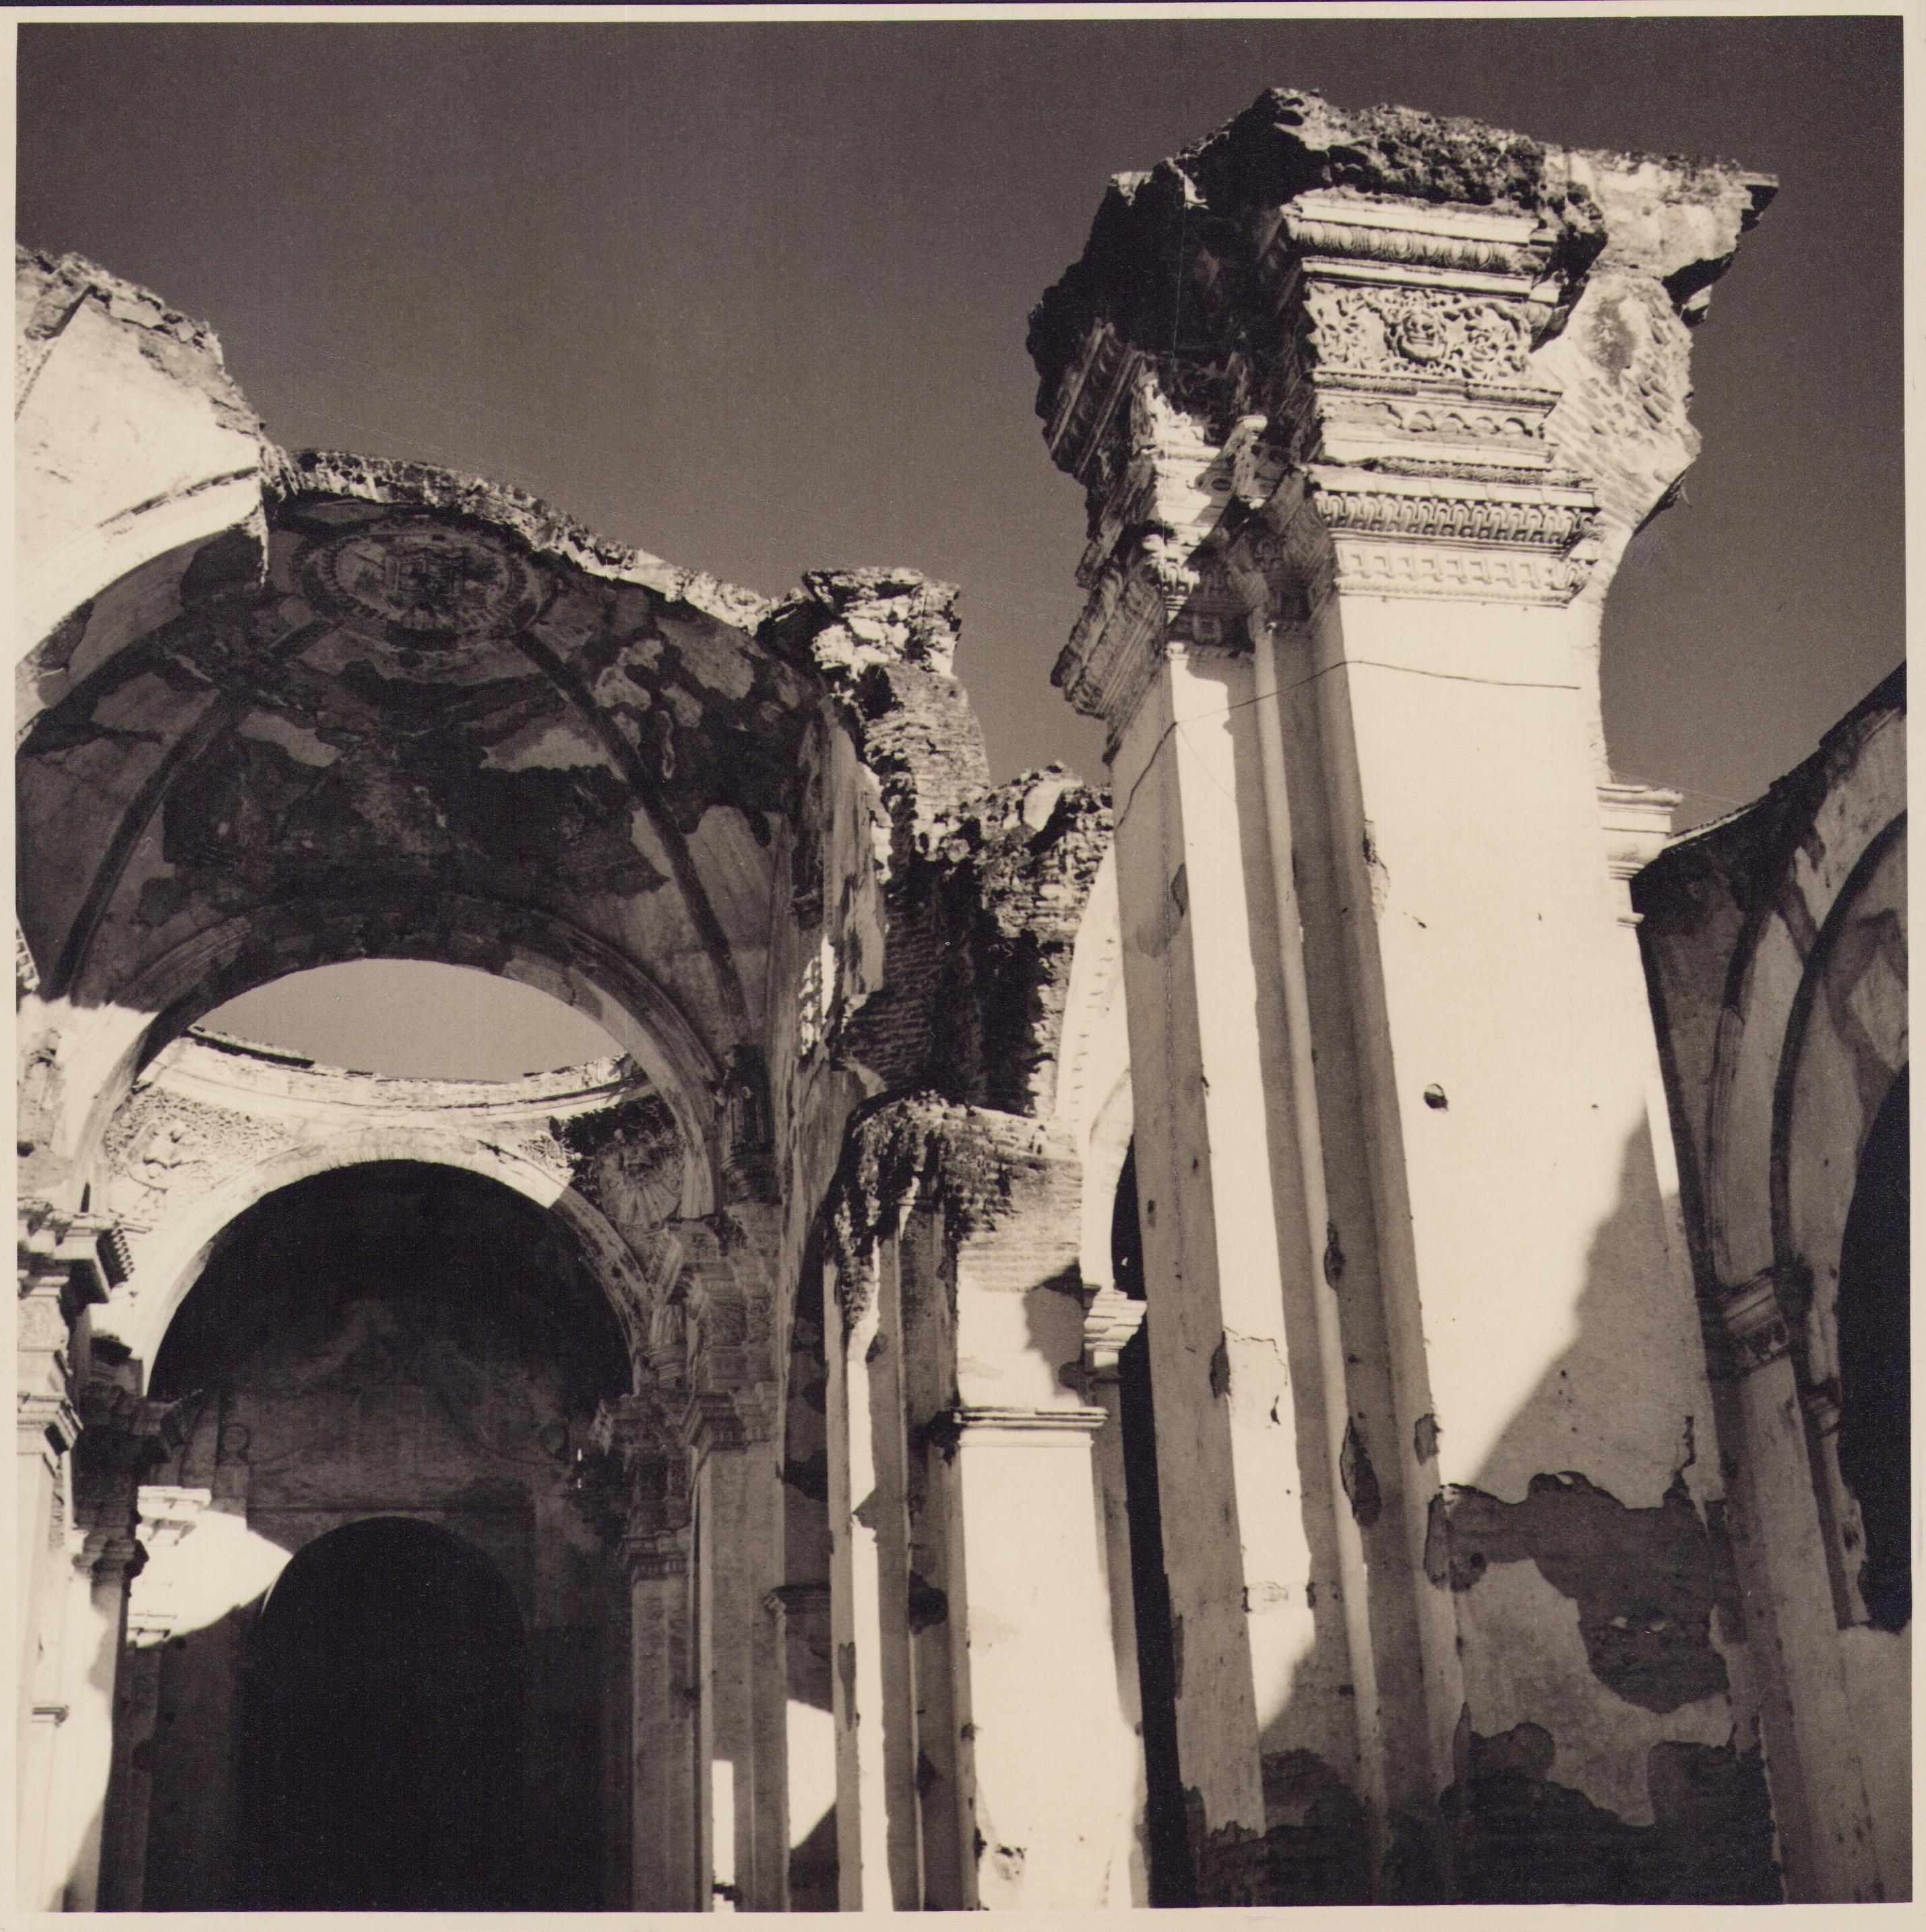 Hanna Seidel Portrait Photograph - Guatemala, Cathedral, Black and White Photography, ca. 1960s 24 x 24, 2 cm